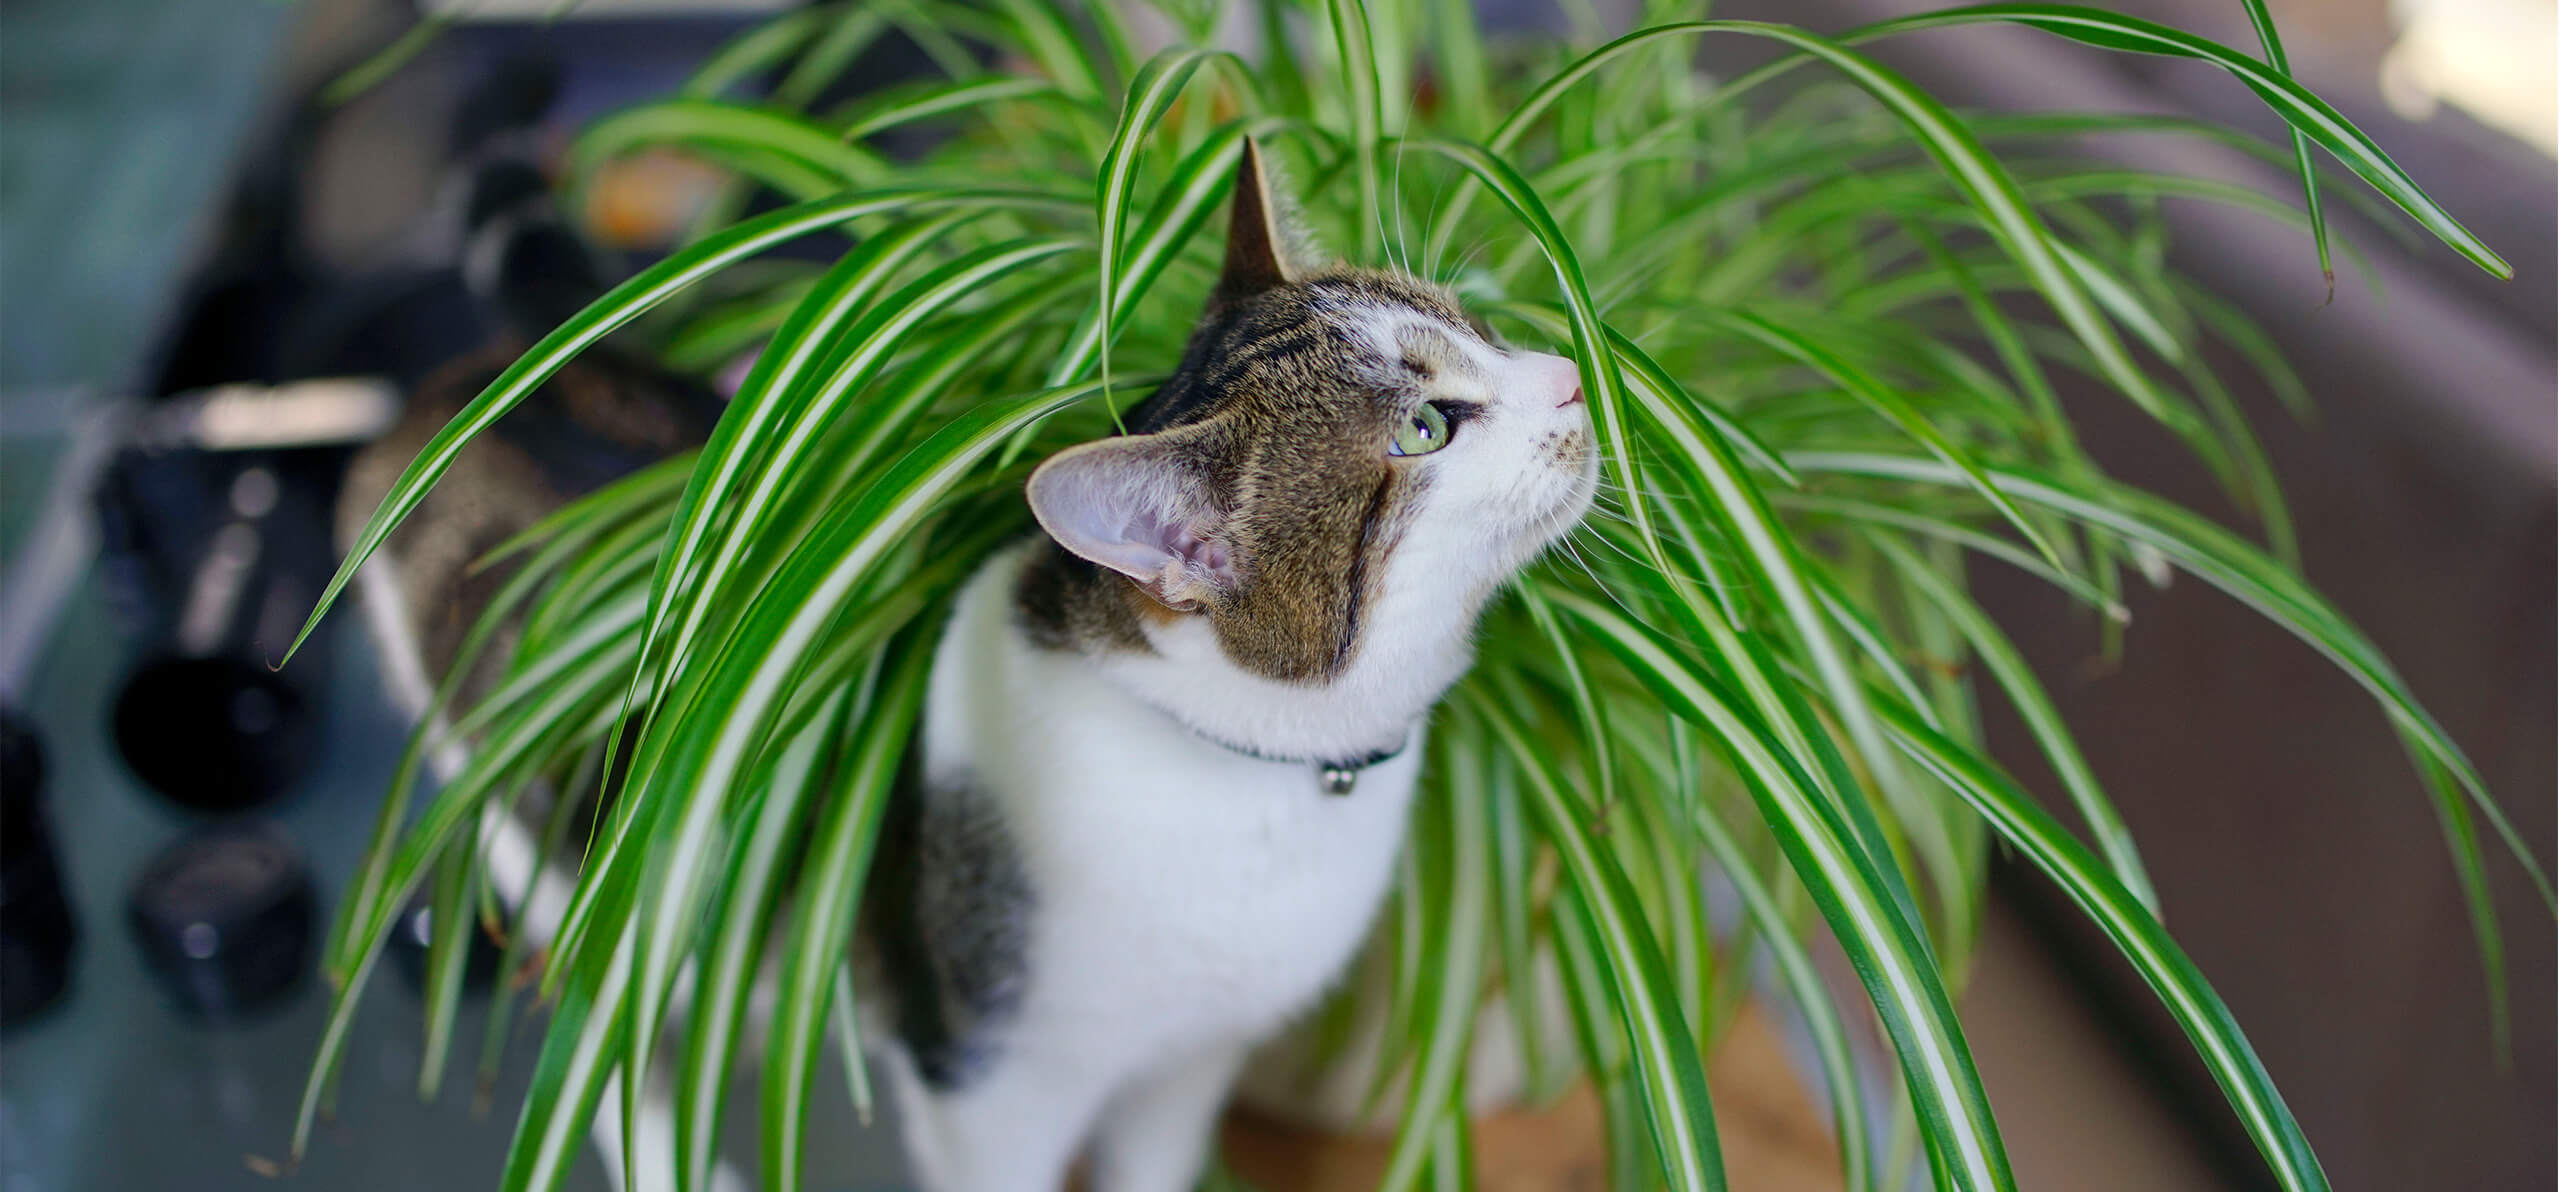 cat brushing itself on an indoor plant